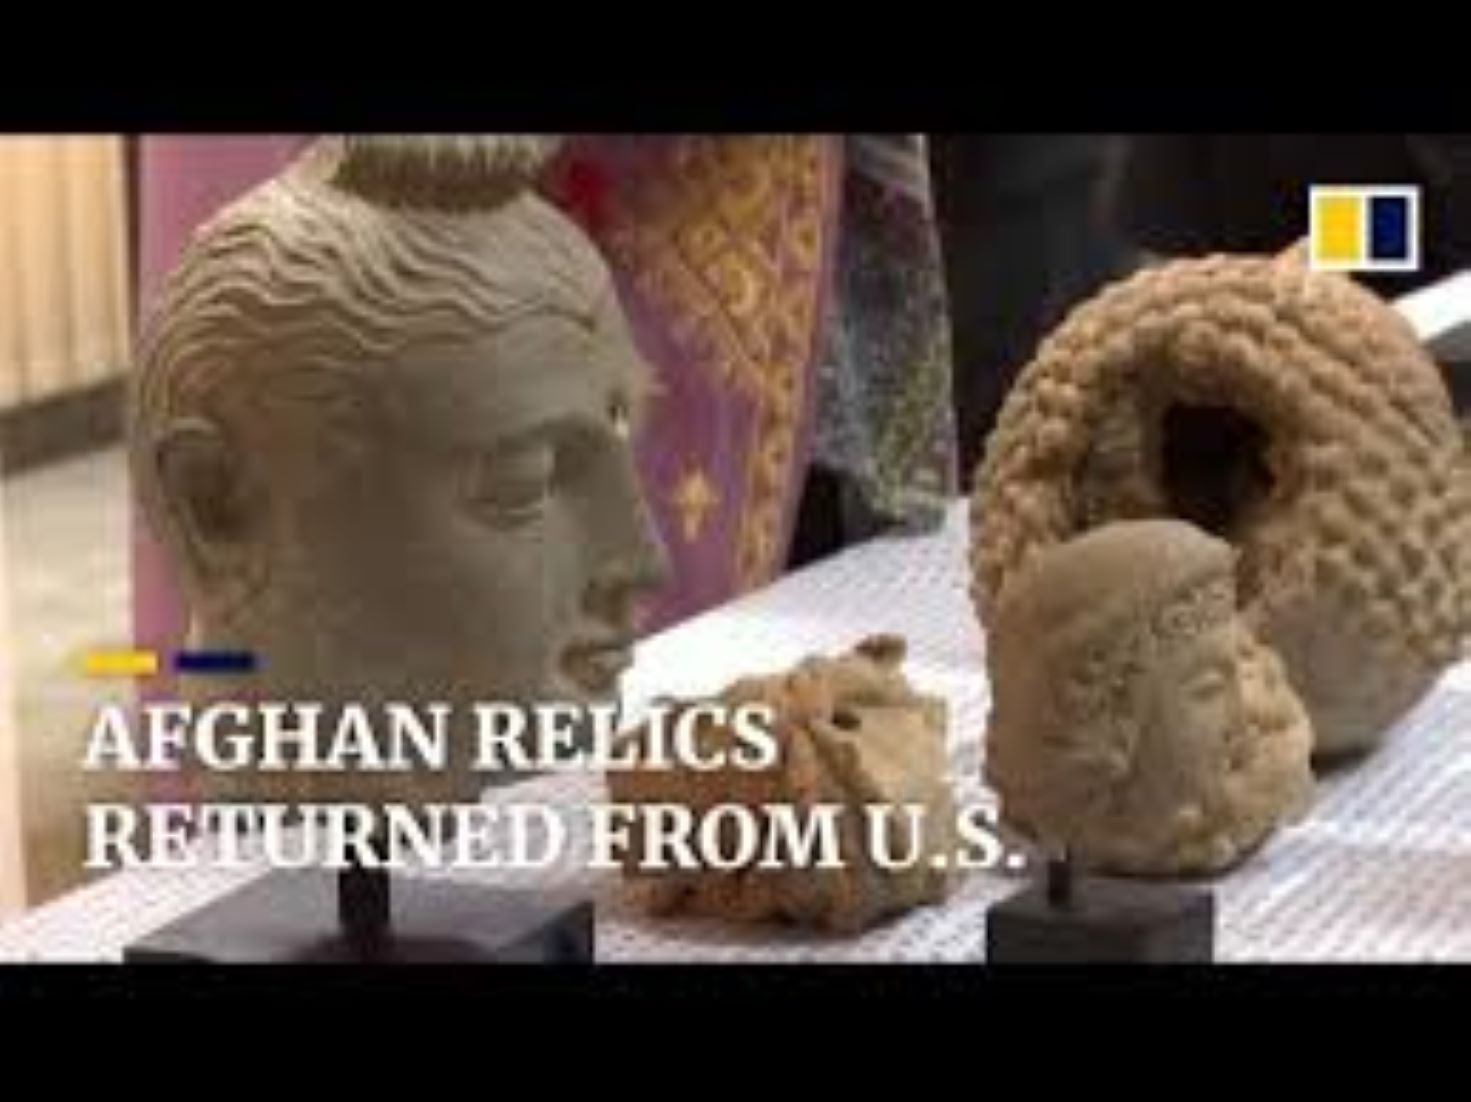 5,000 Pieces Of Cultural Relics Transferred To Afghan National Museum